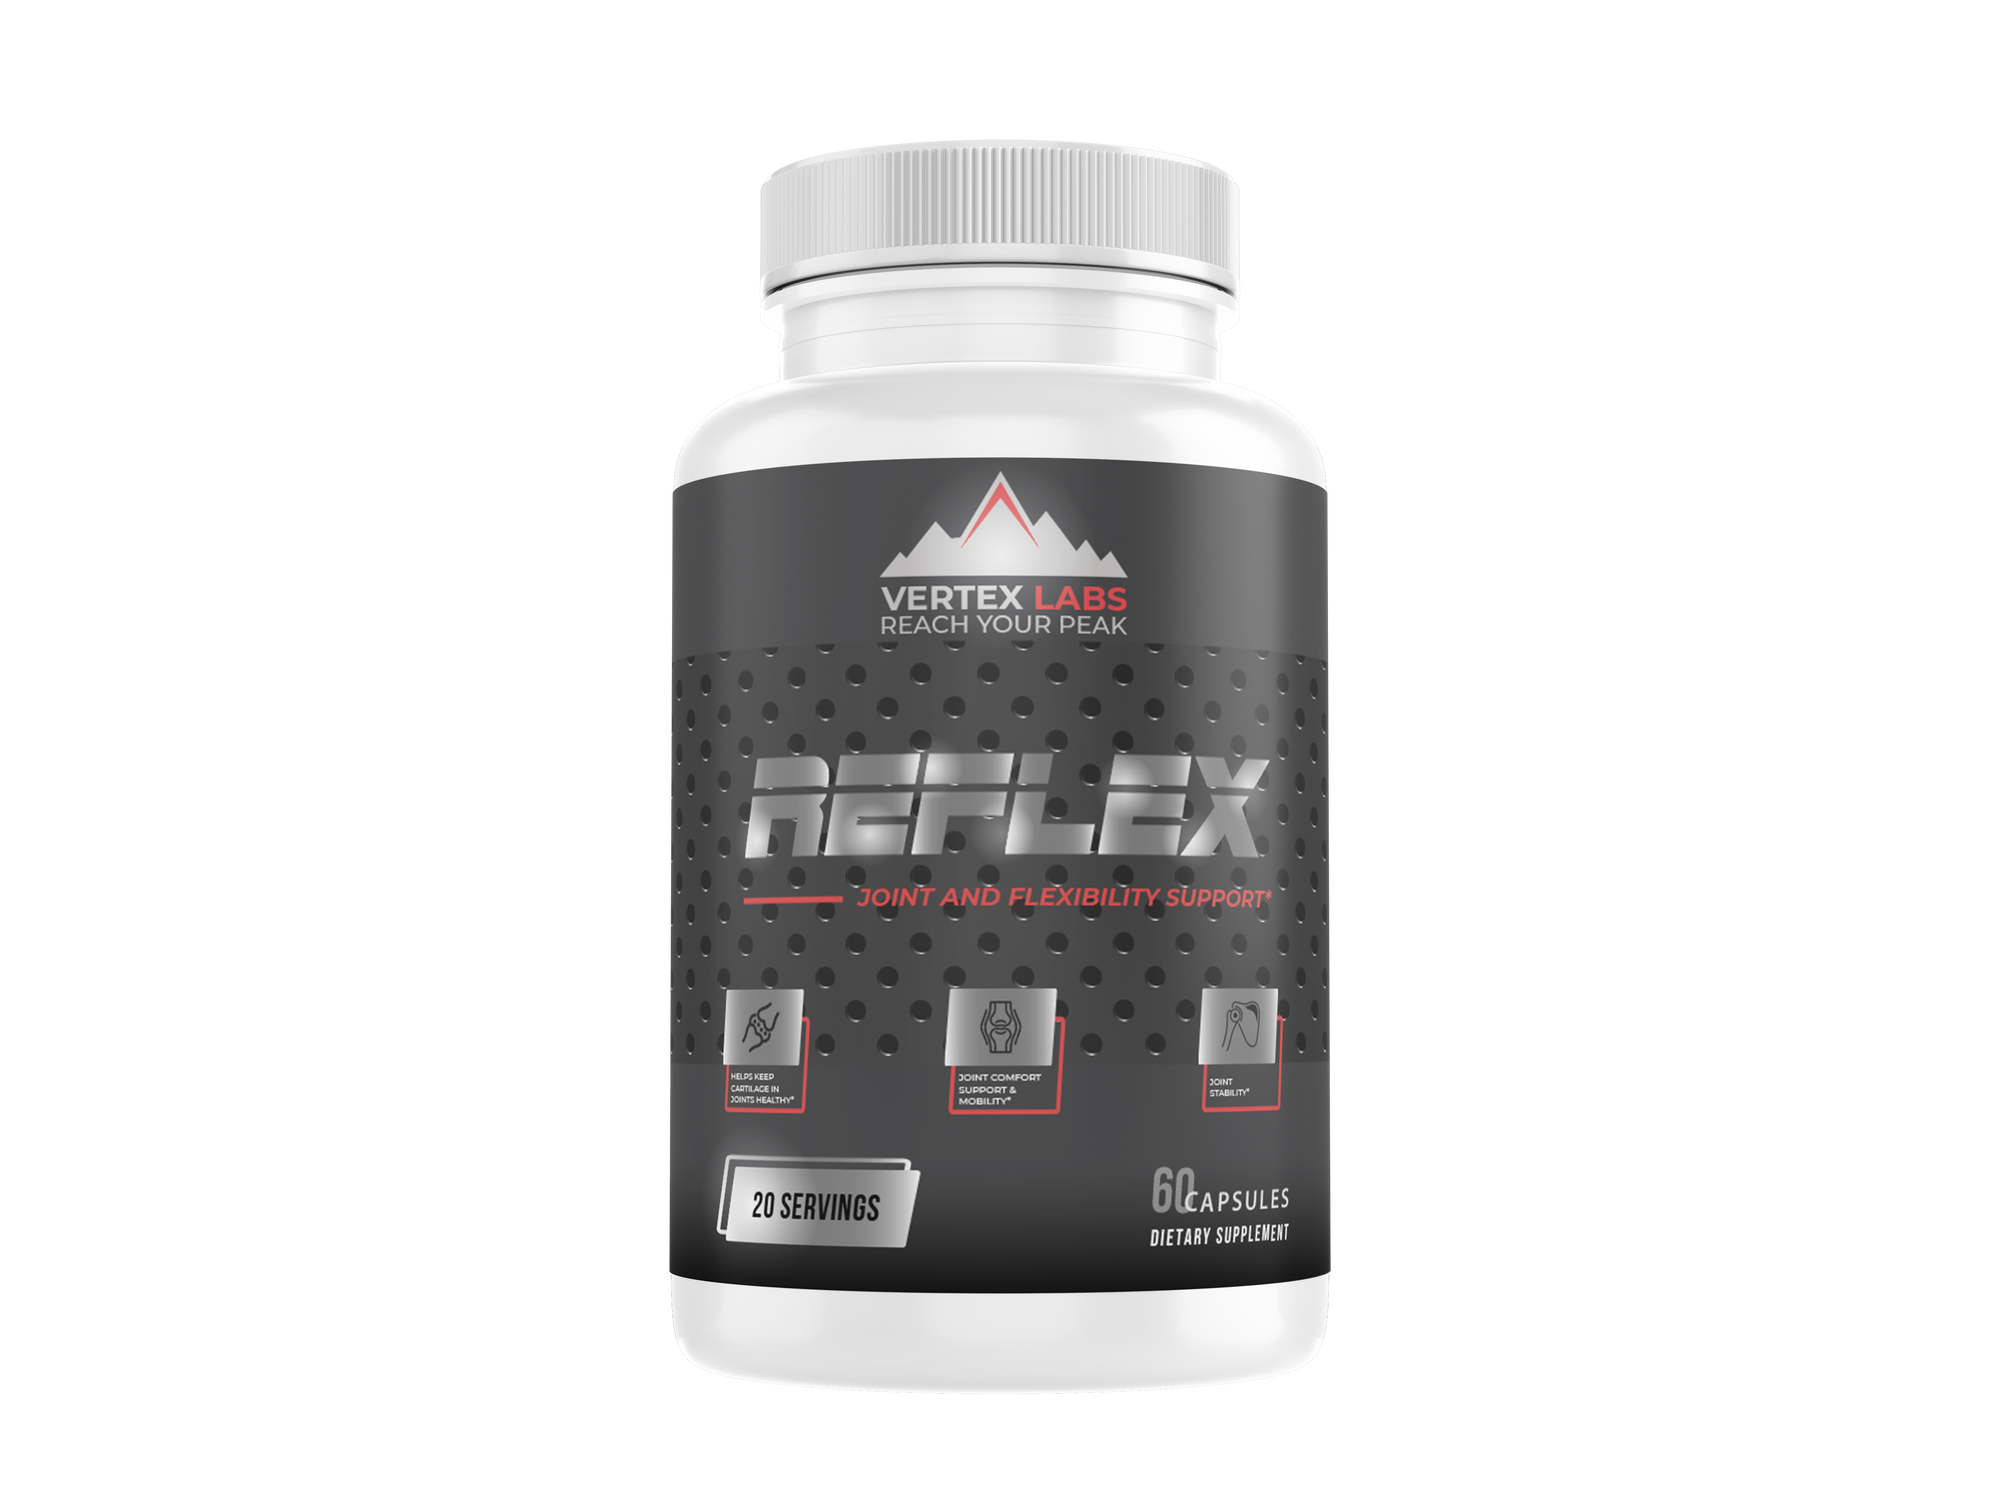 Reflex - Joint and Flexibility Support